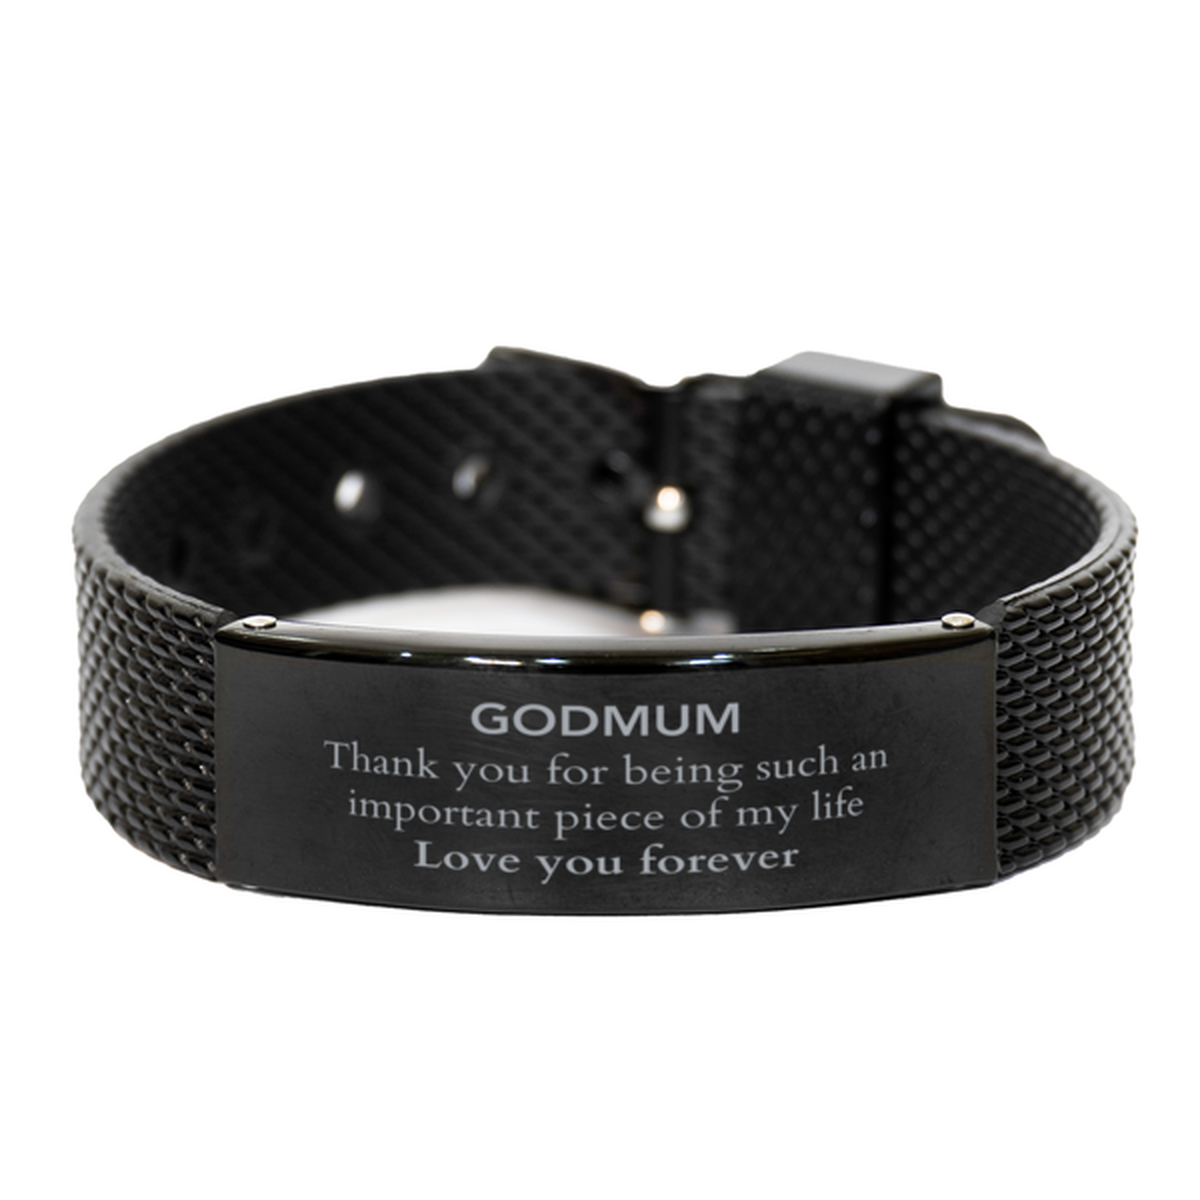 Appropriate Godmum Black Shark Mesh Bracelet Epic Birthday Gifts for Godmum Thank you for being such an important piece of my life Godmum Christmas Mothers Fathers Day